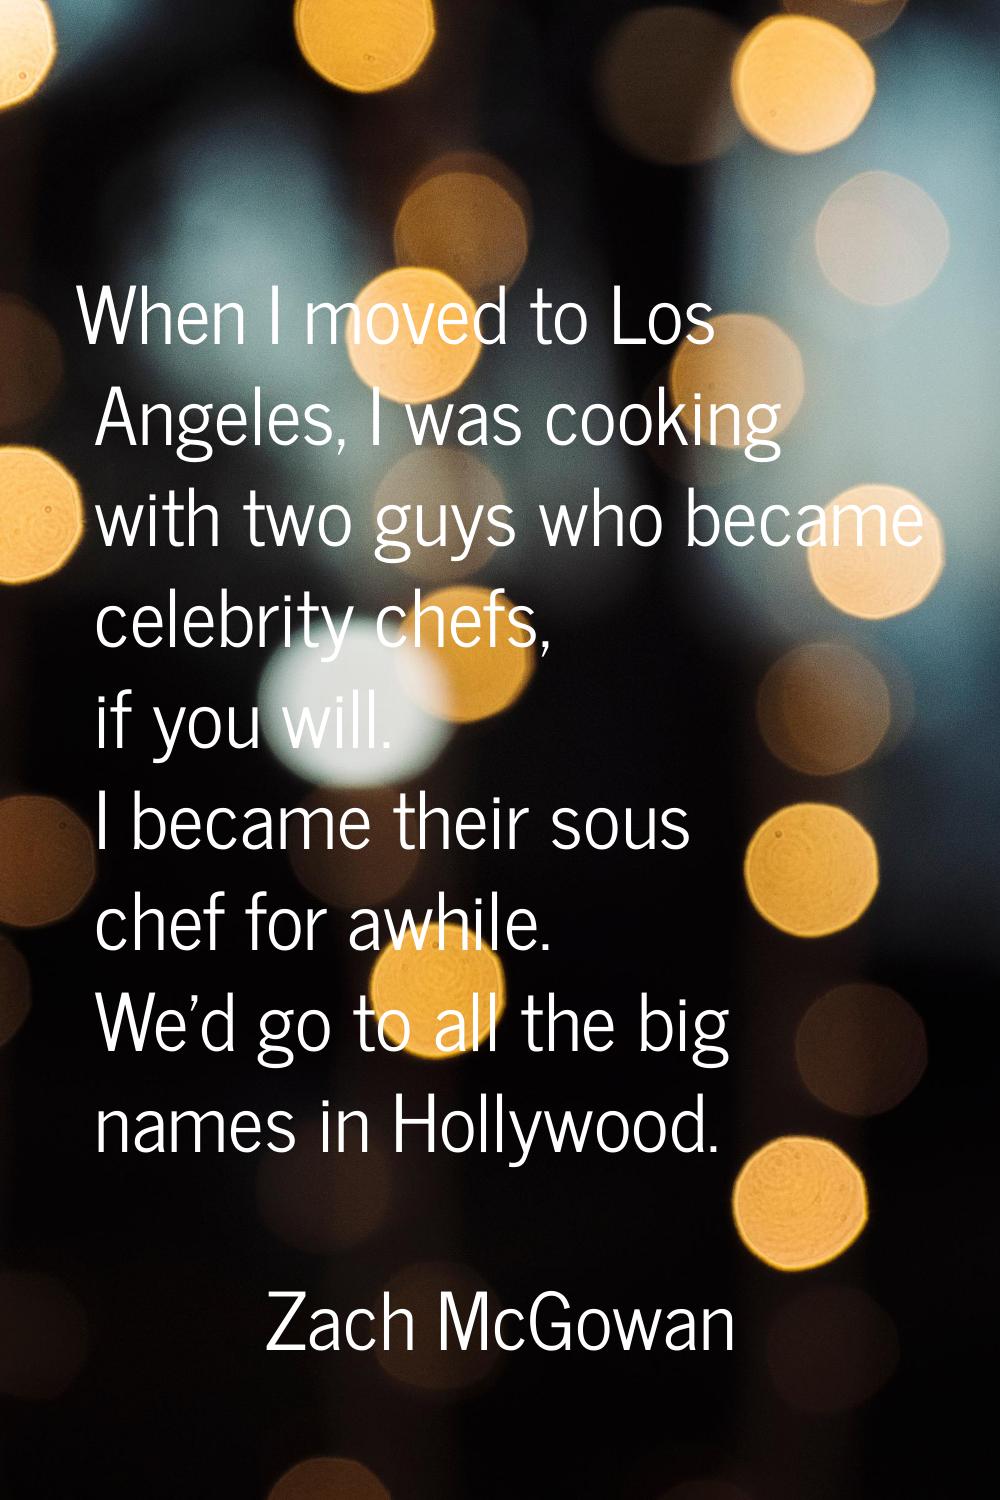 When I moved to Los Angeles, I was cooking with two guys who became celebrity chefs, if you will. I